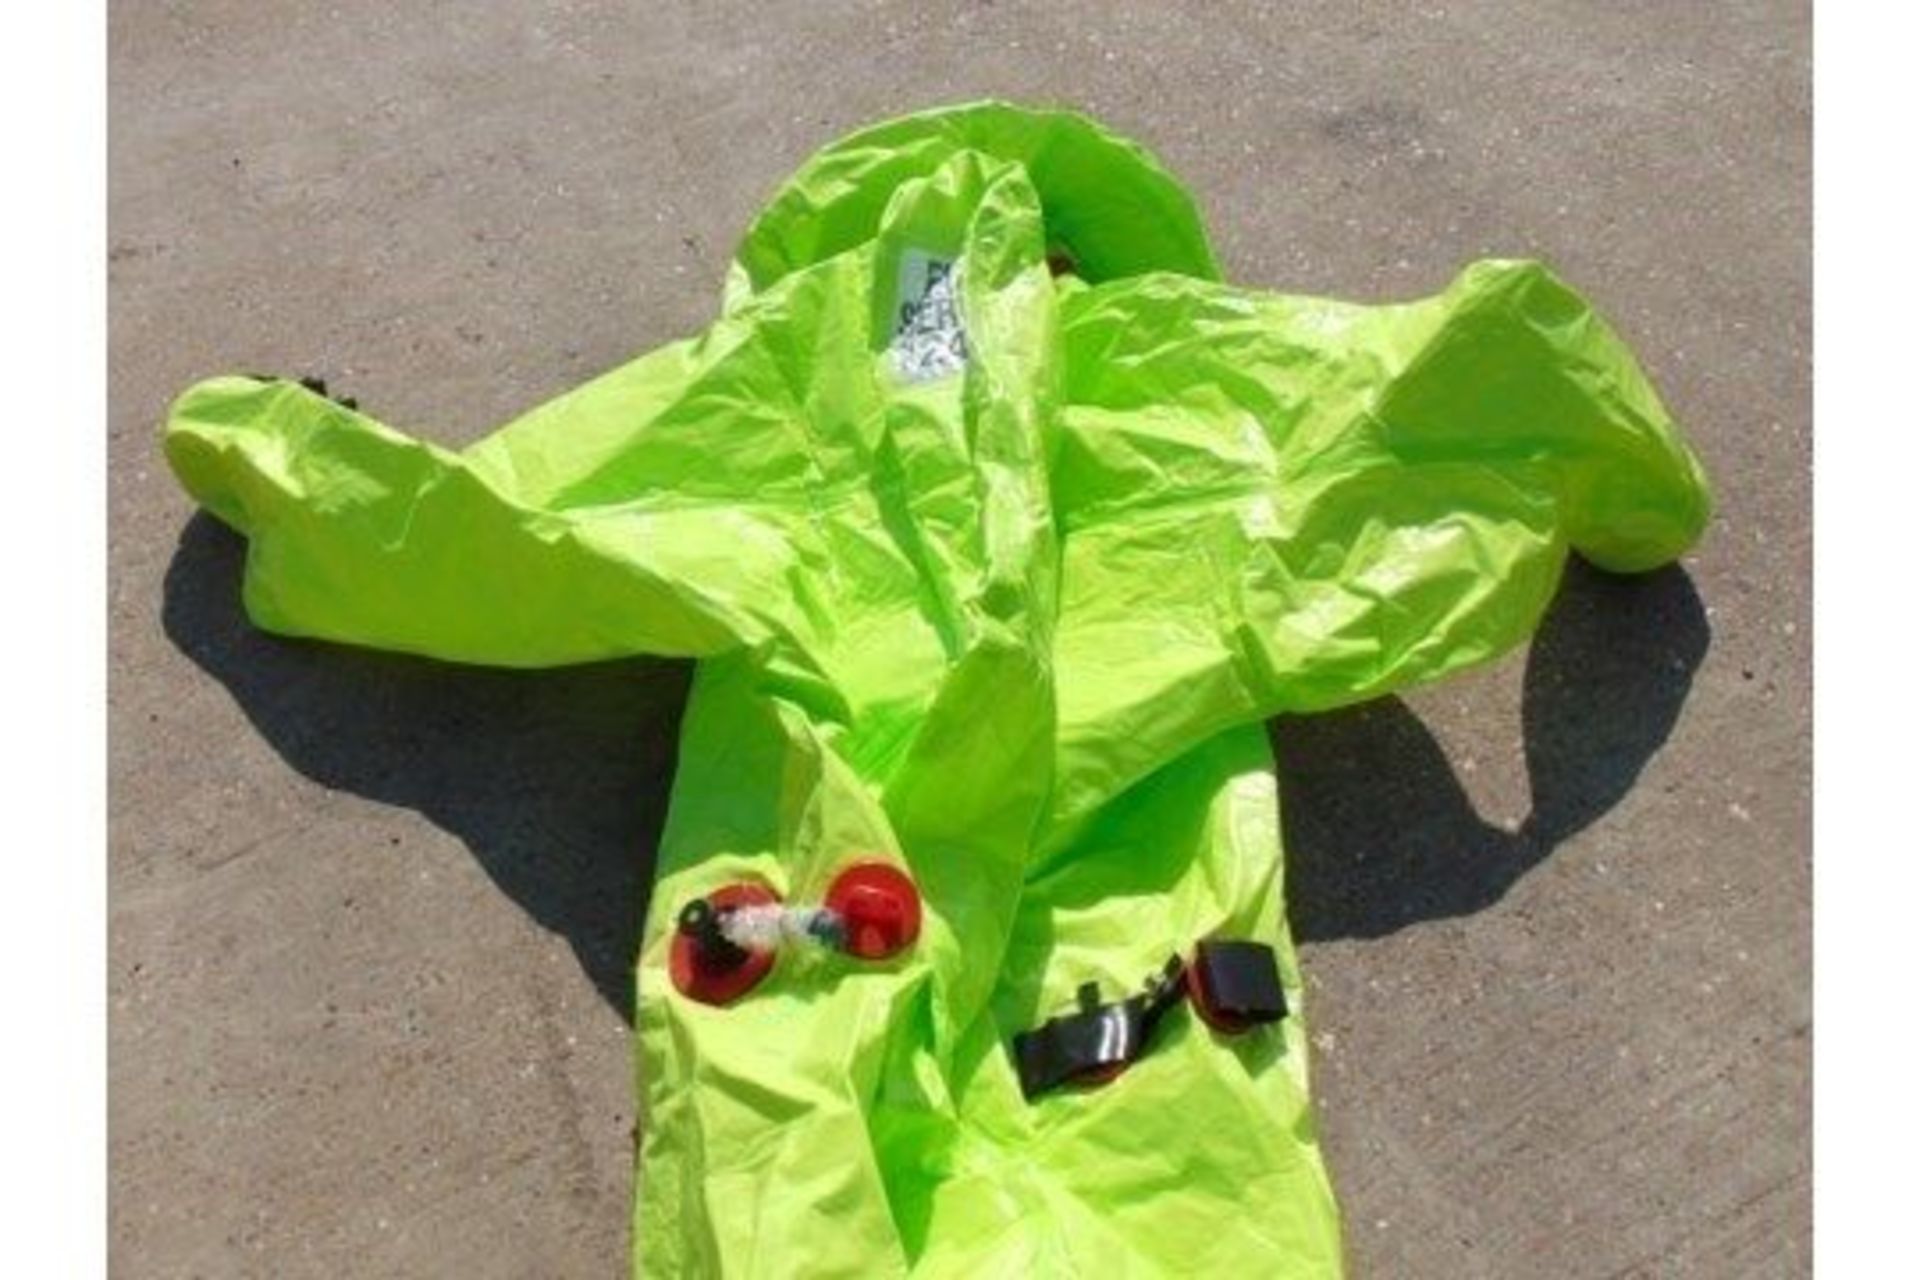 10x UNISSUED RESPIREX TYCHEM TK GAS-TIGHT HAZMAT SUIT TYPE 1A WITH ATTACHED BOOTS AND GLOVES - Image 7 of 11